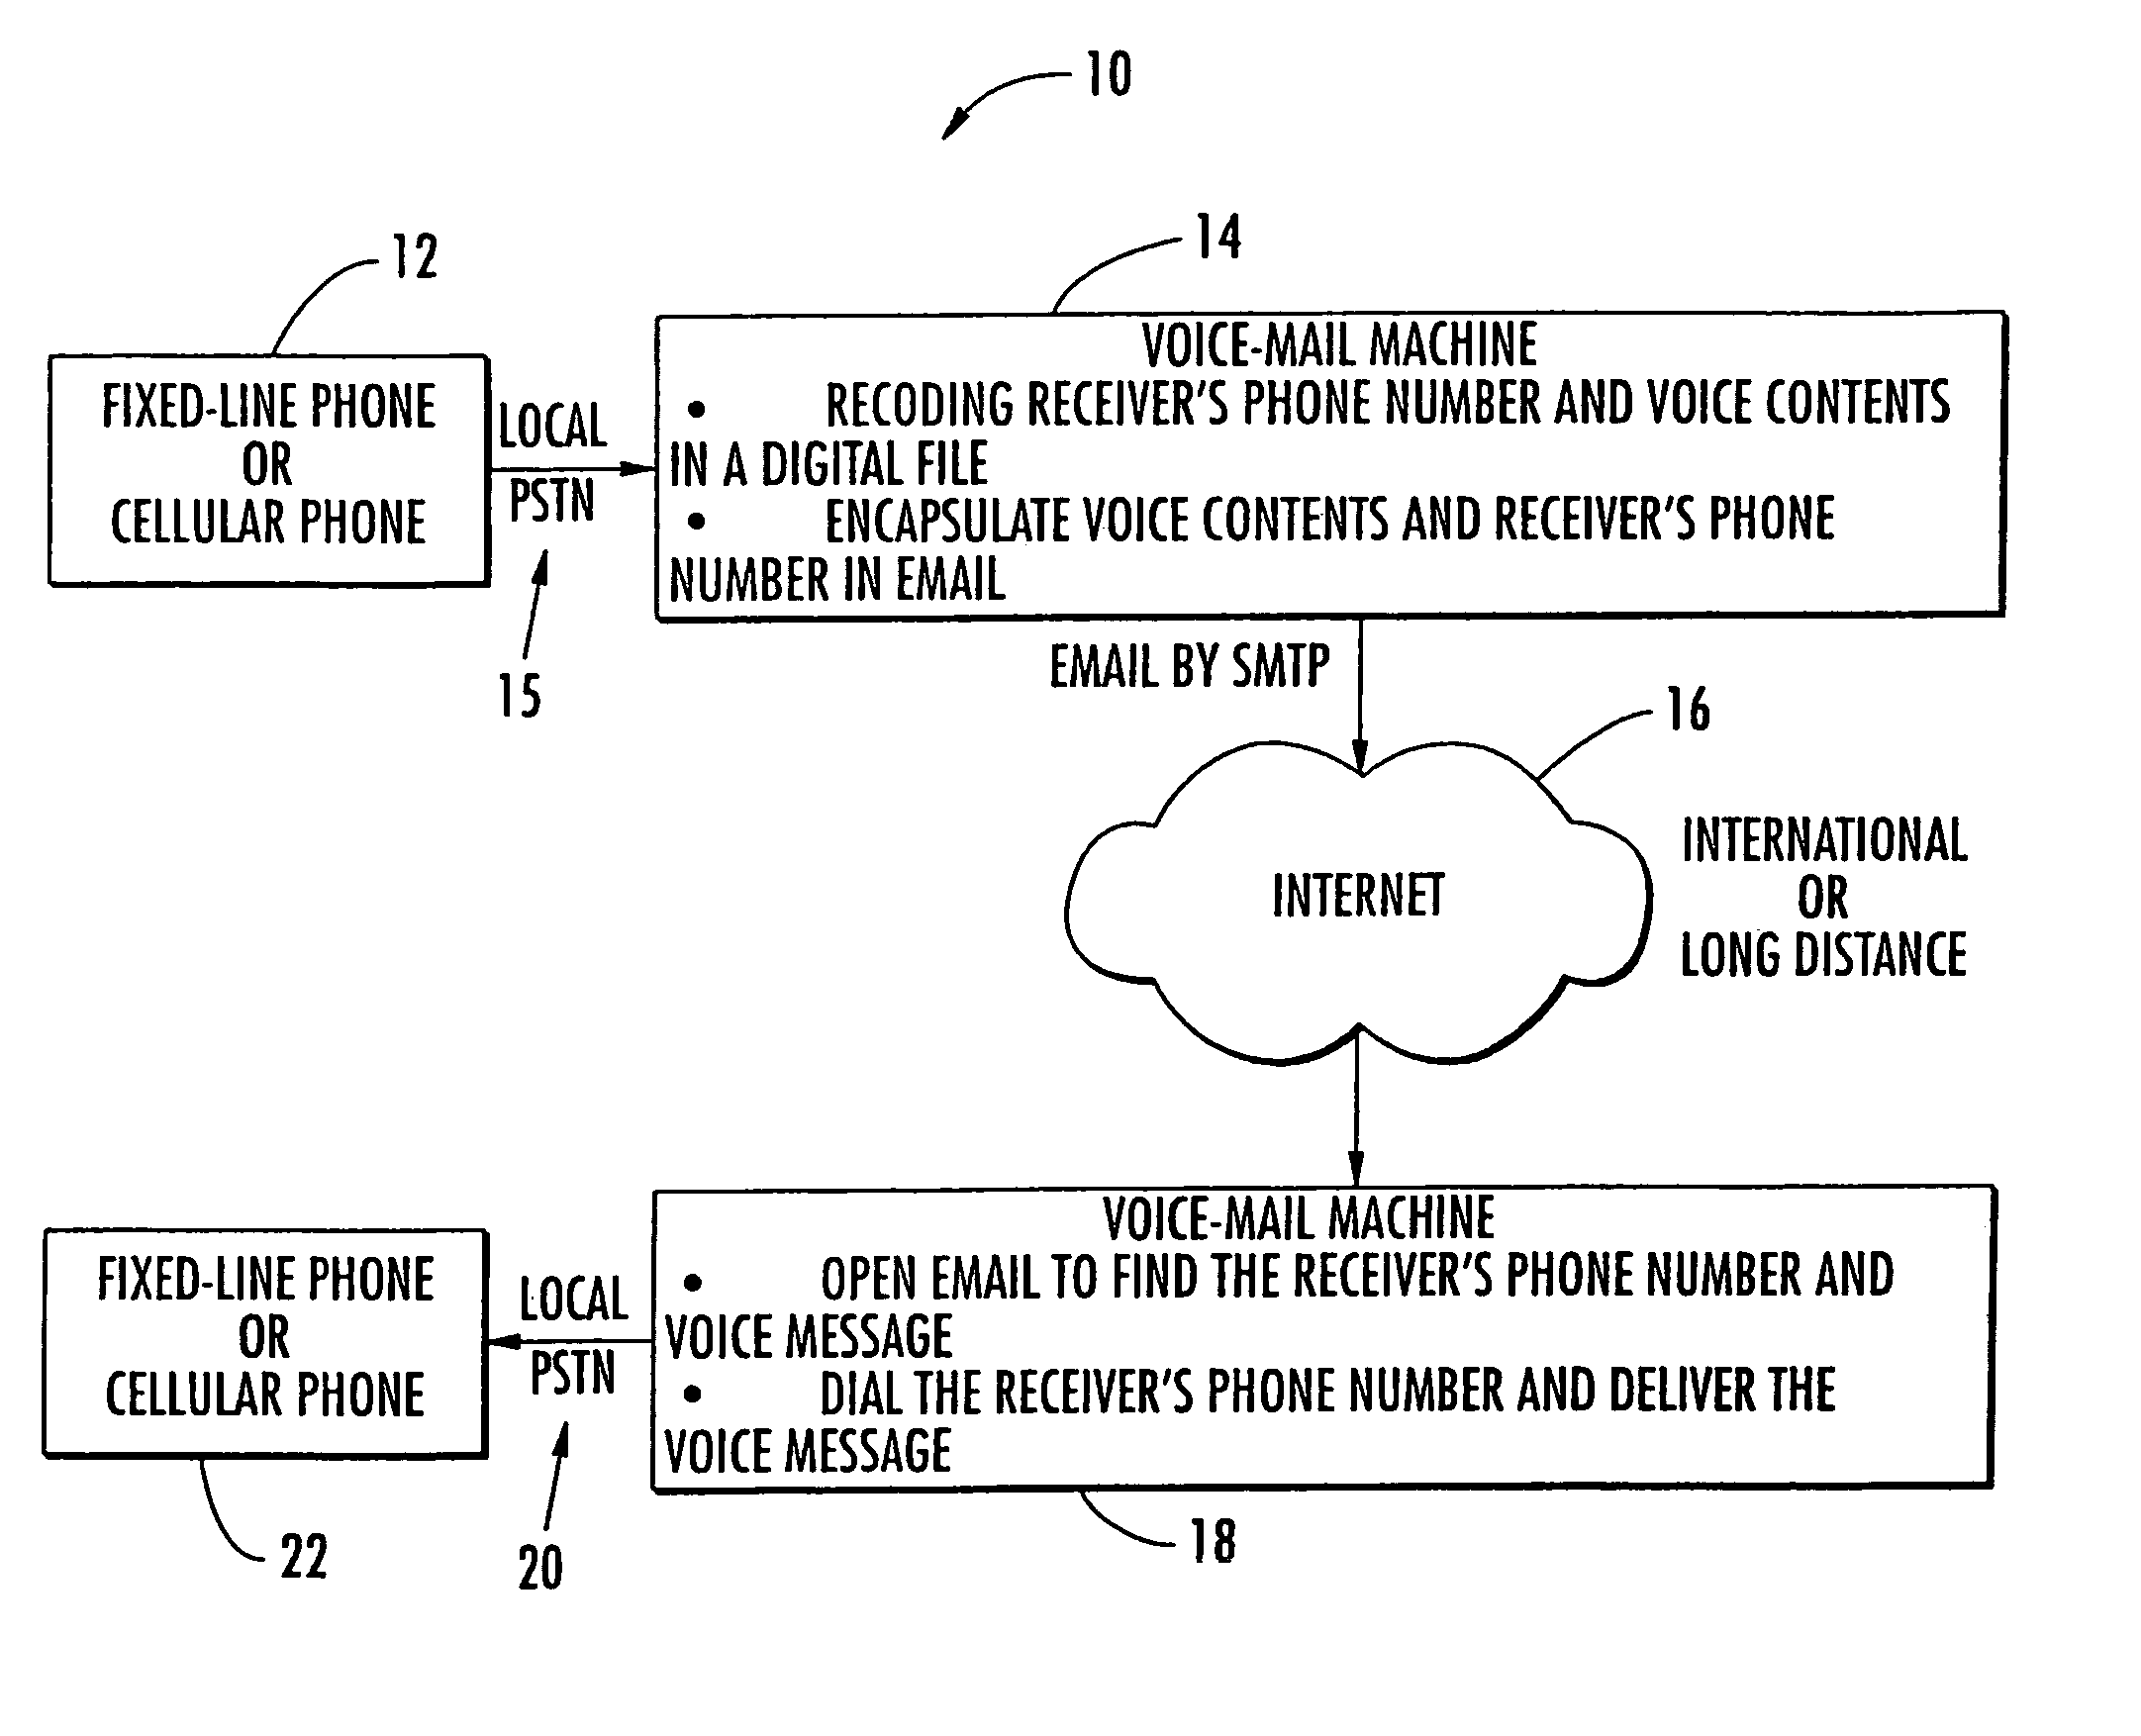 Voice message transfer between a sender and a receiver